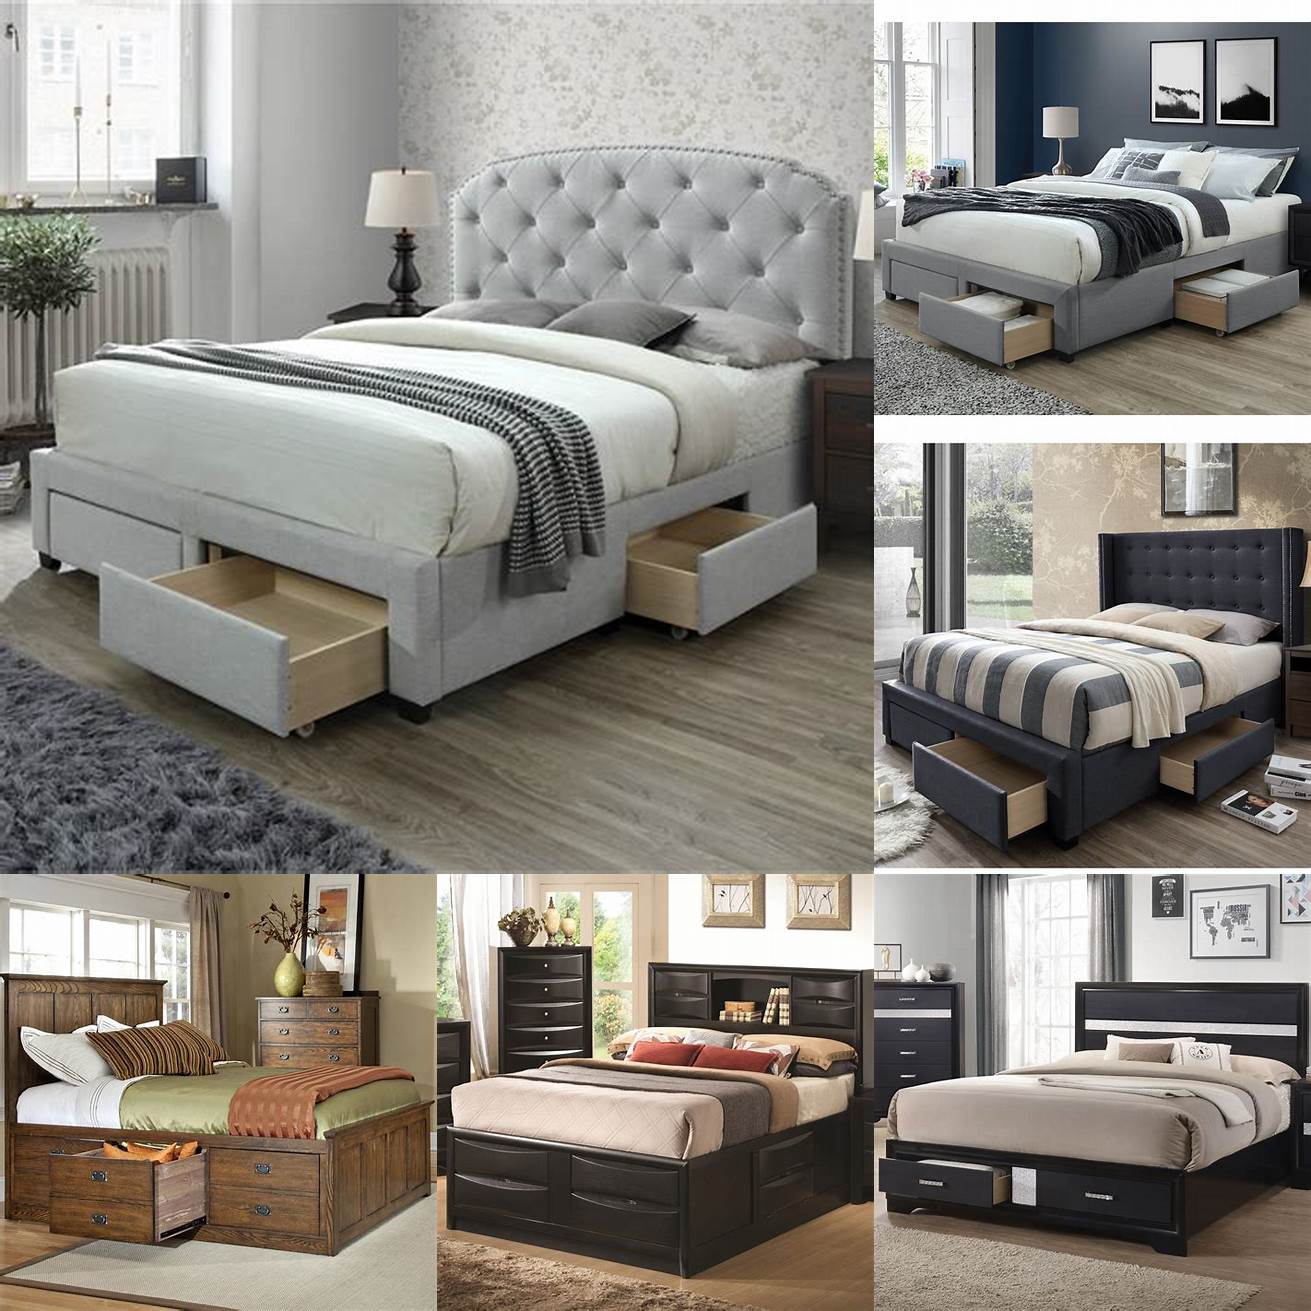 Image of a Queen Size Bed with Storage